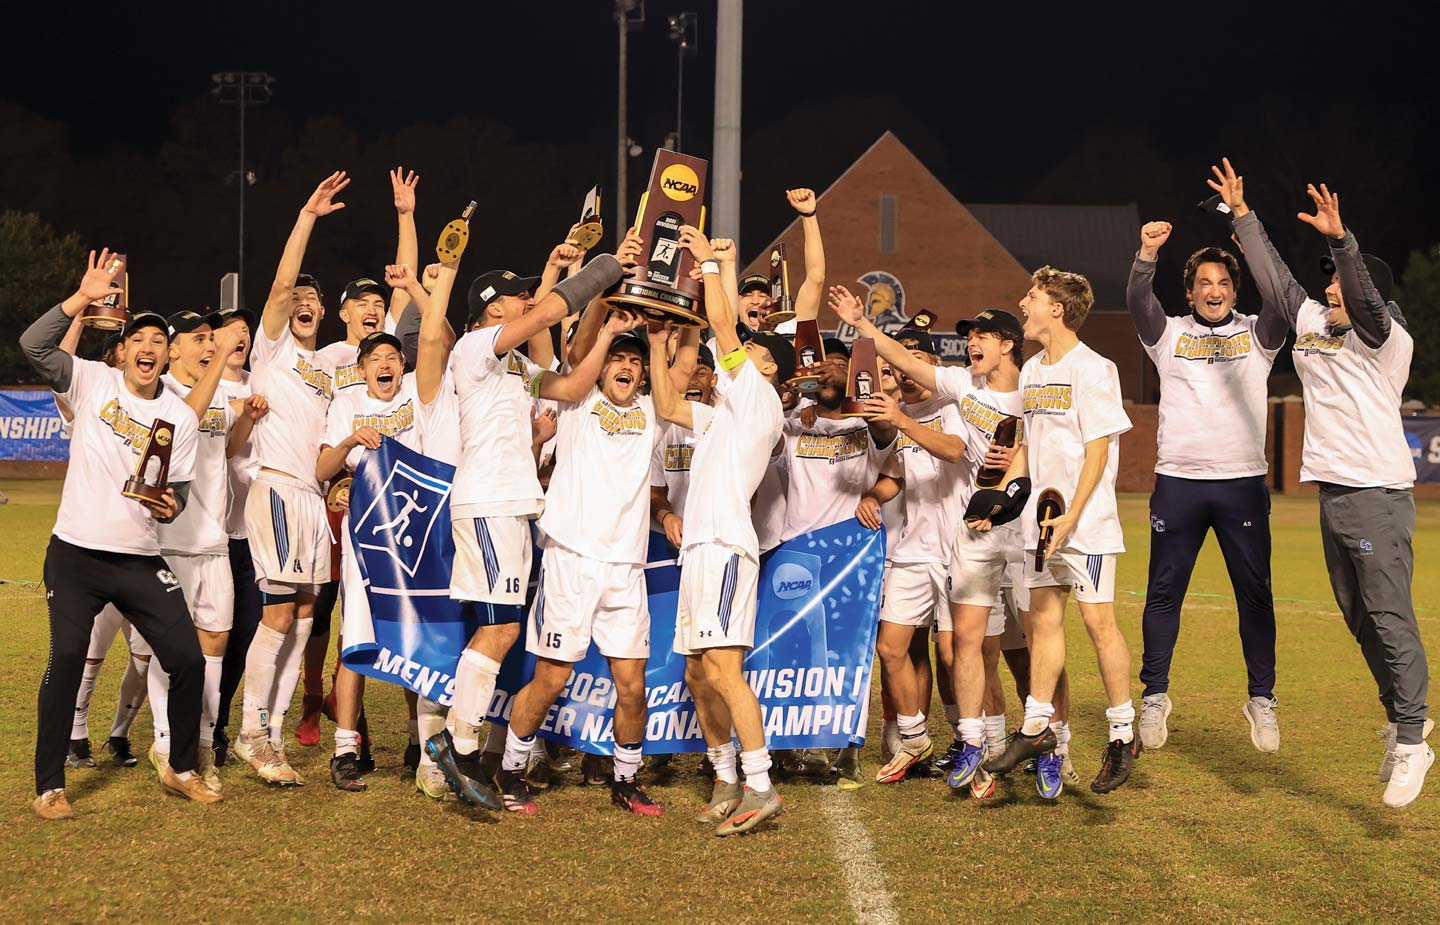 The men’s team celebrates at UNCG Soccer Stadium after the College’s first-ever national championship win.